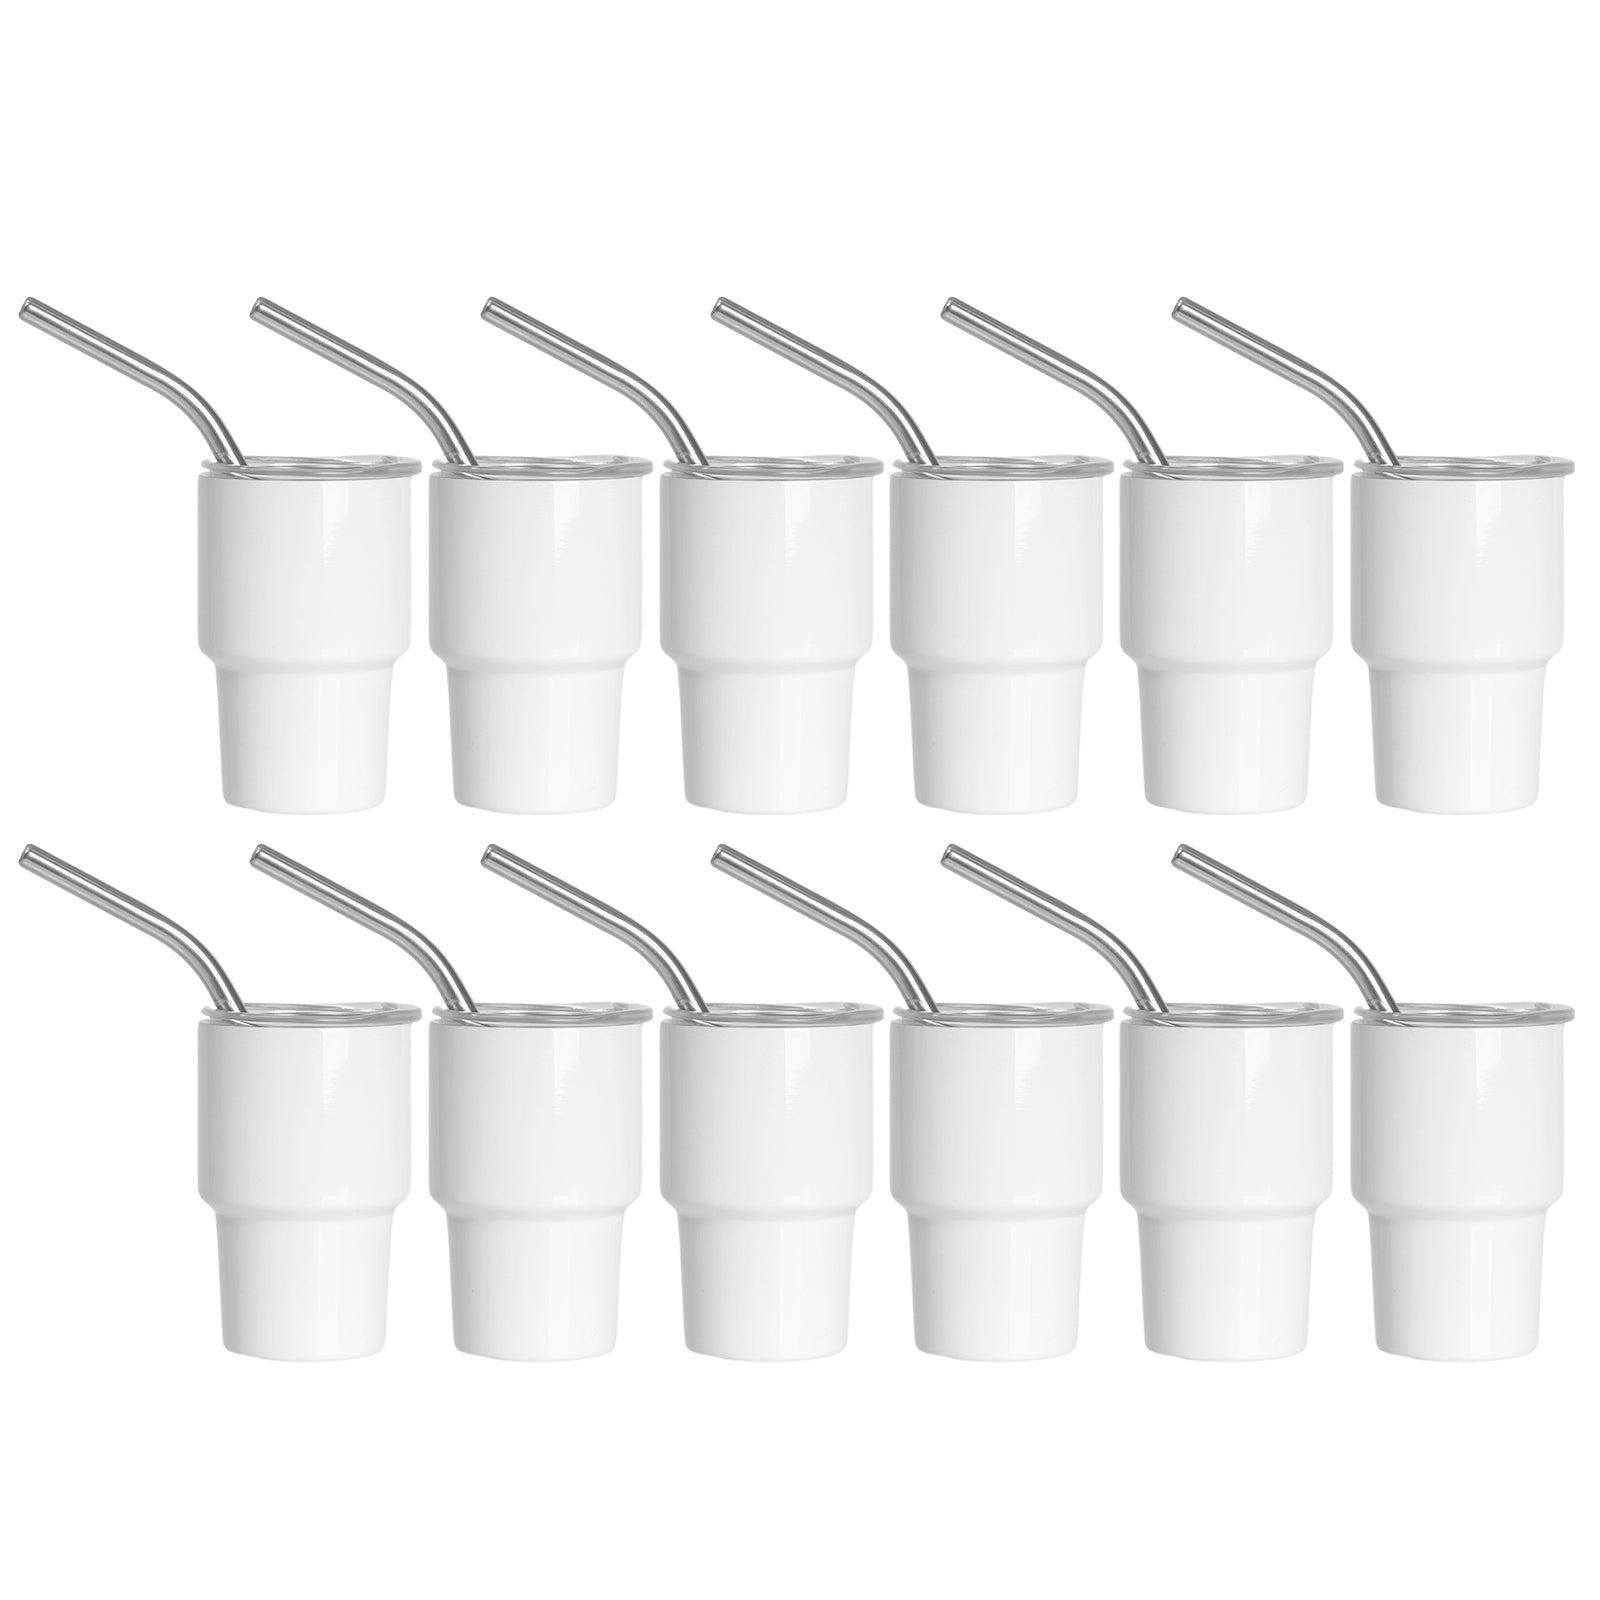 PYD Life 12 Pack 3 oz Sublimation Shot Glasses Tumblers Blanks Bulk White Mini Wine Tumbler Stainless Steel Tumblers Cups with Lid and Straw for